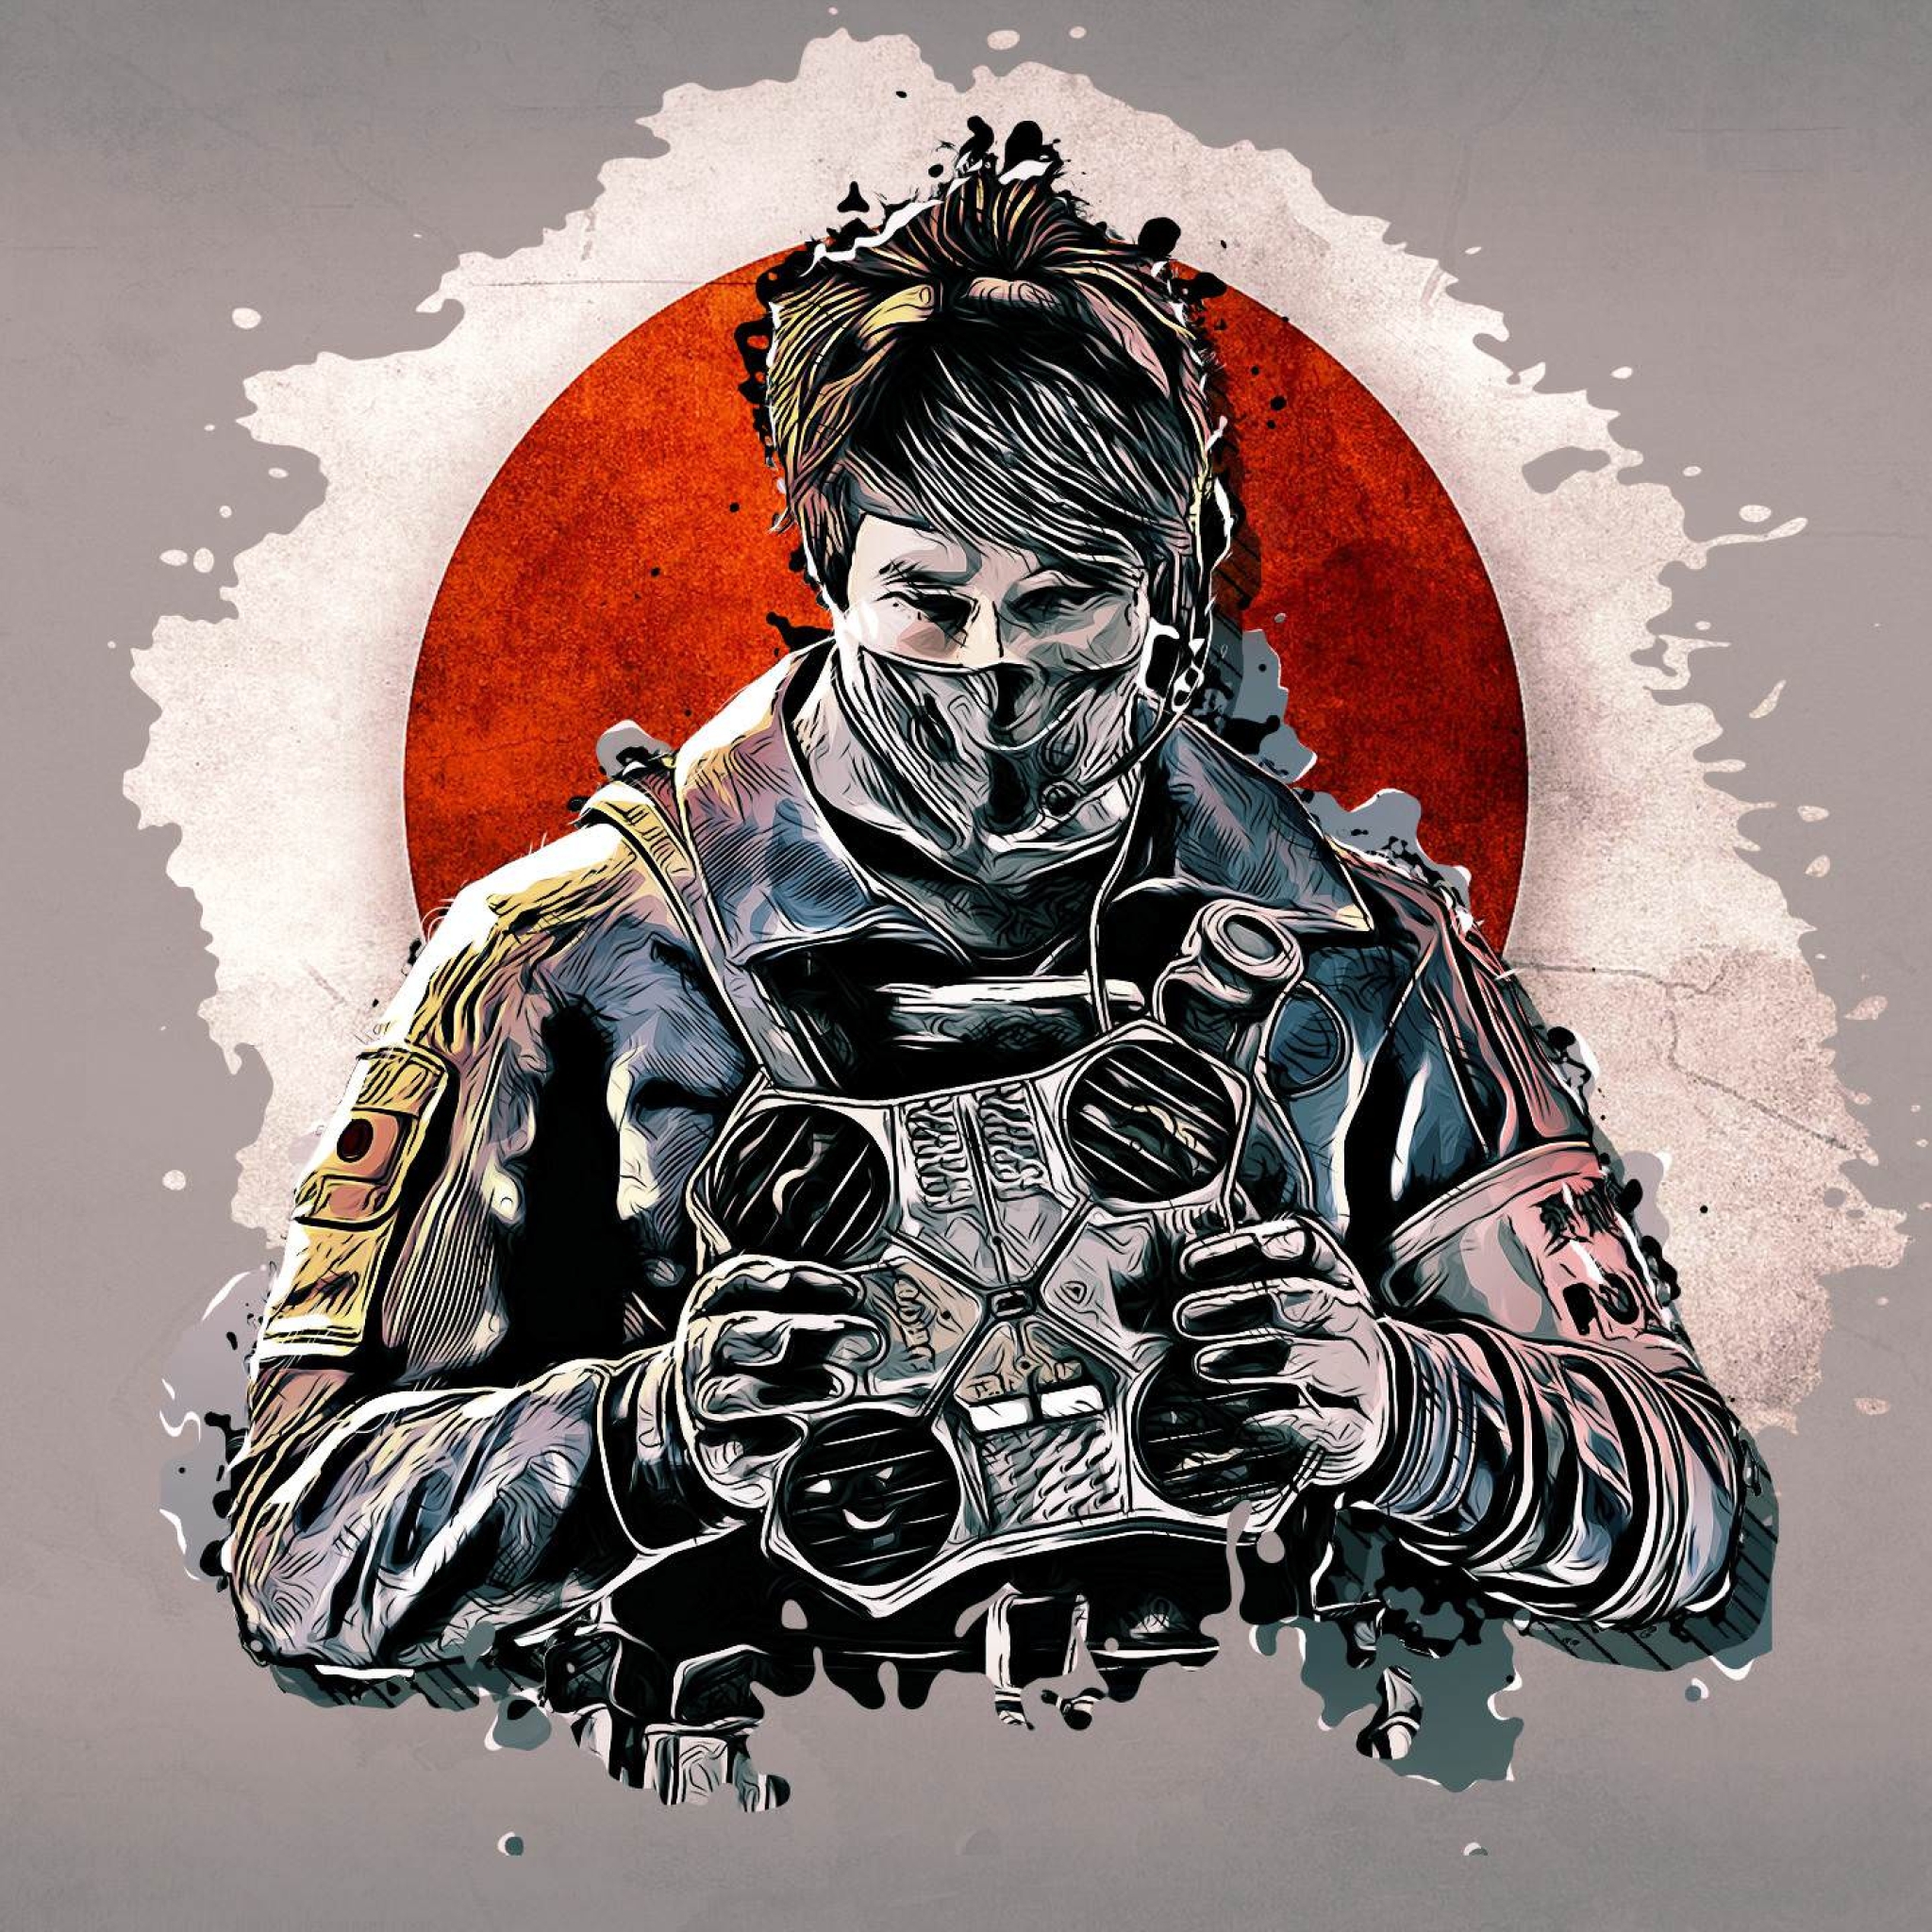 48x48 Echo From Rainbow Six Siege Ipad Air Wallpaper Hd Games 4k Wallpapers Images Photos And Background Wallpapers Den